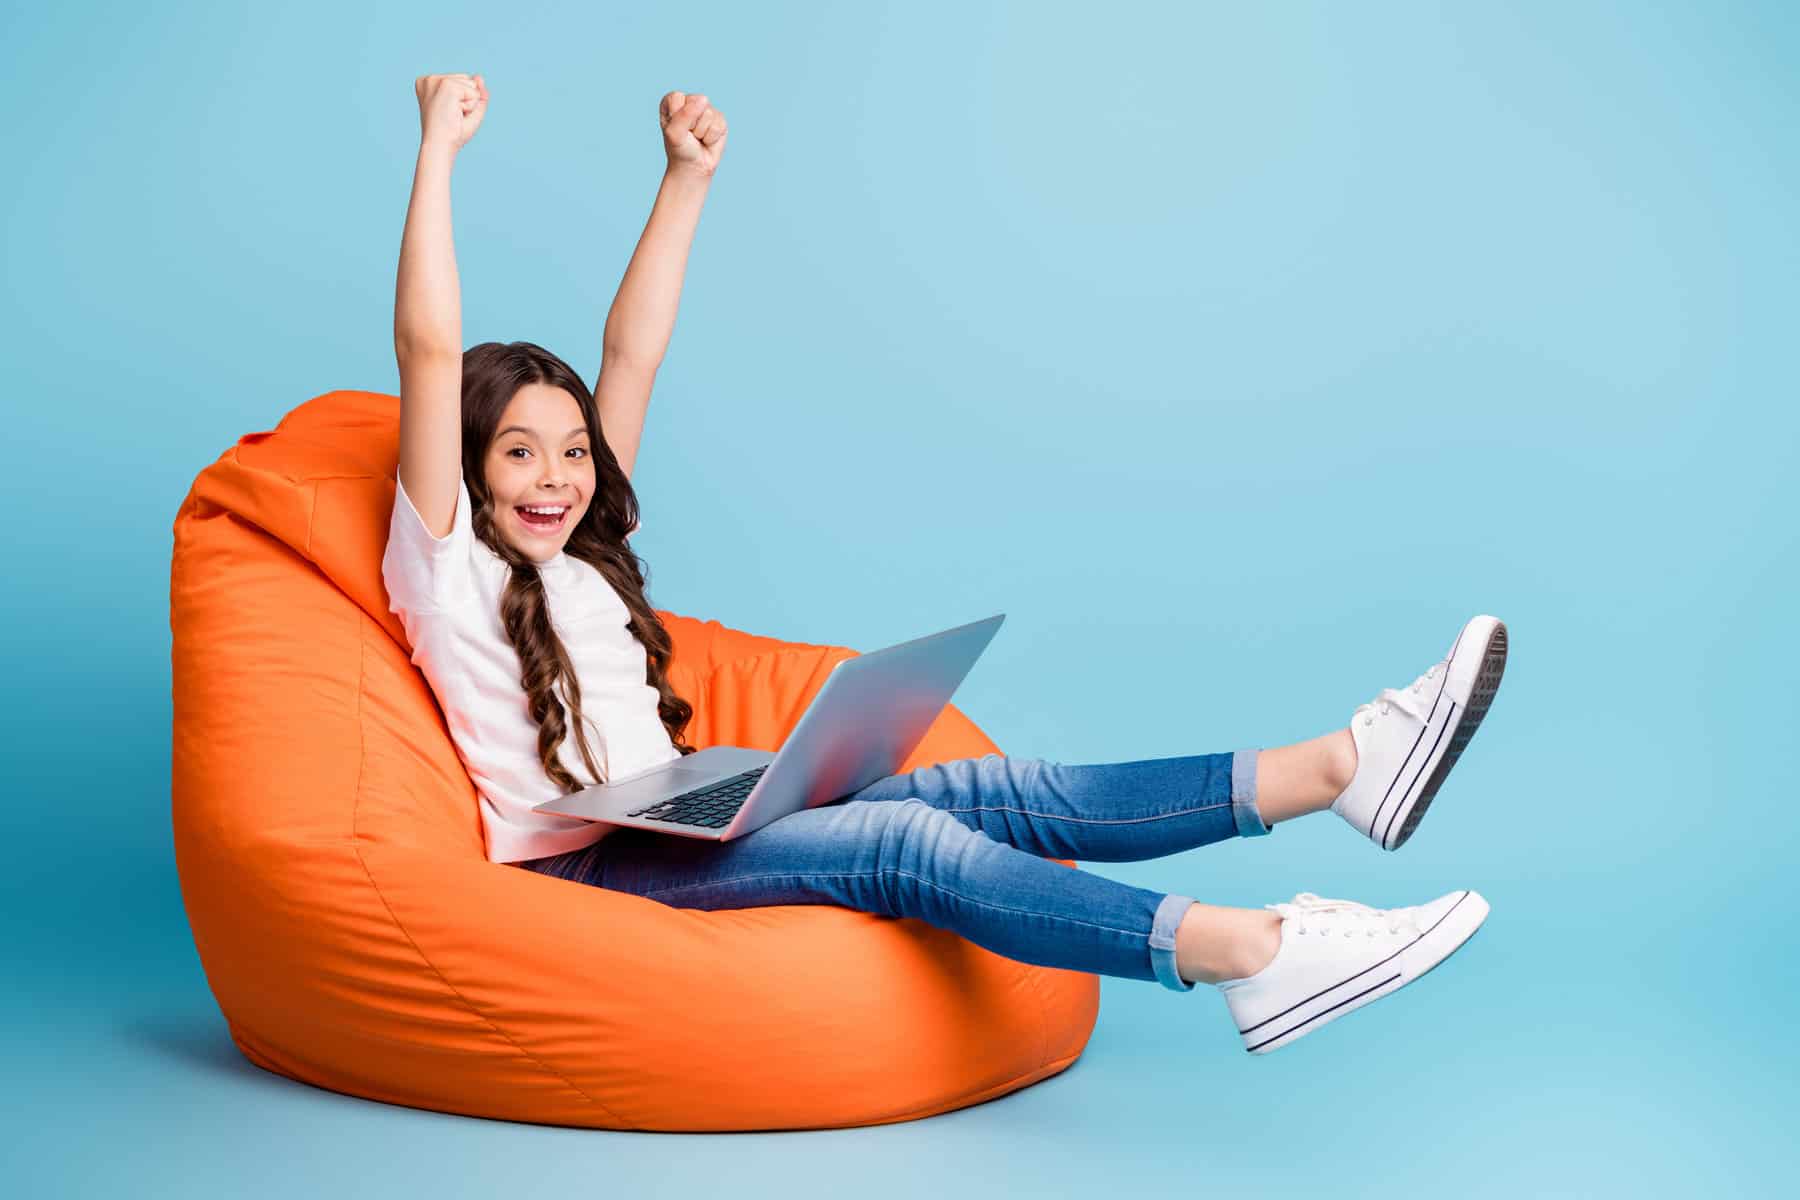 Young girl sitting on an orange beanbag using a laptop